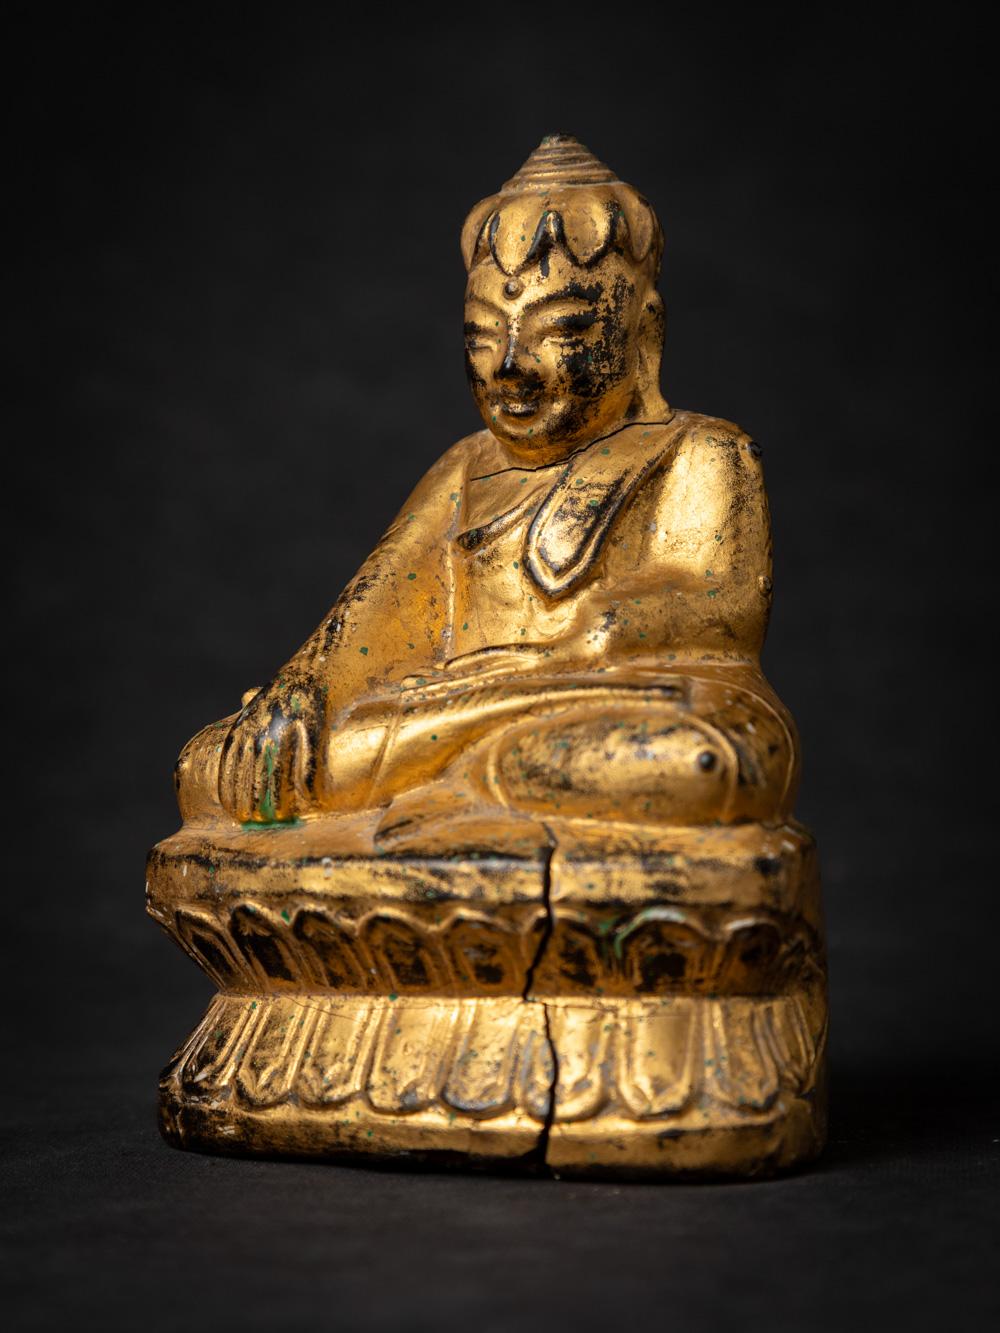 This antique wooden Burmese Lotus Buddha statue is a remarkable piece of religious artistry. Crafted from wood and standing at a height of 14.8 cm, with dimensions of 10 cm in width and 7.7 cm in depth, this statue exudes elegance.

The statue is